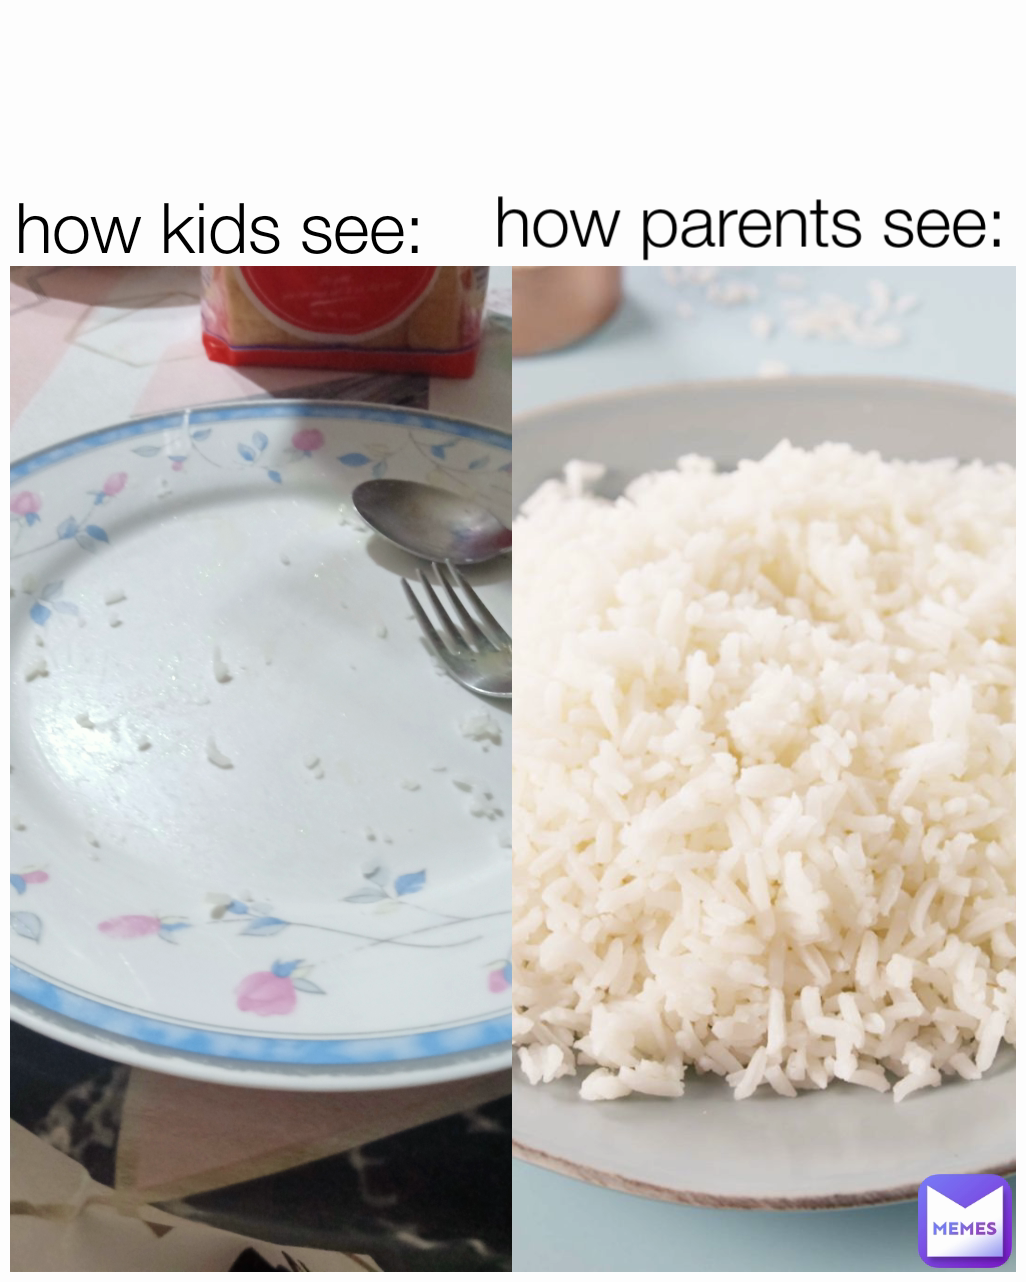 how kids see: how parents see: